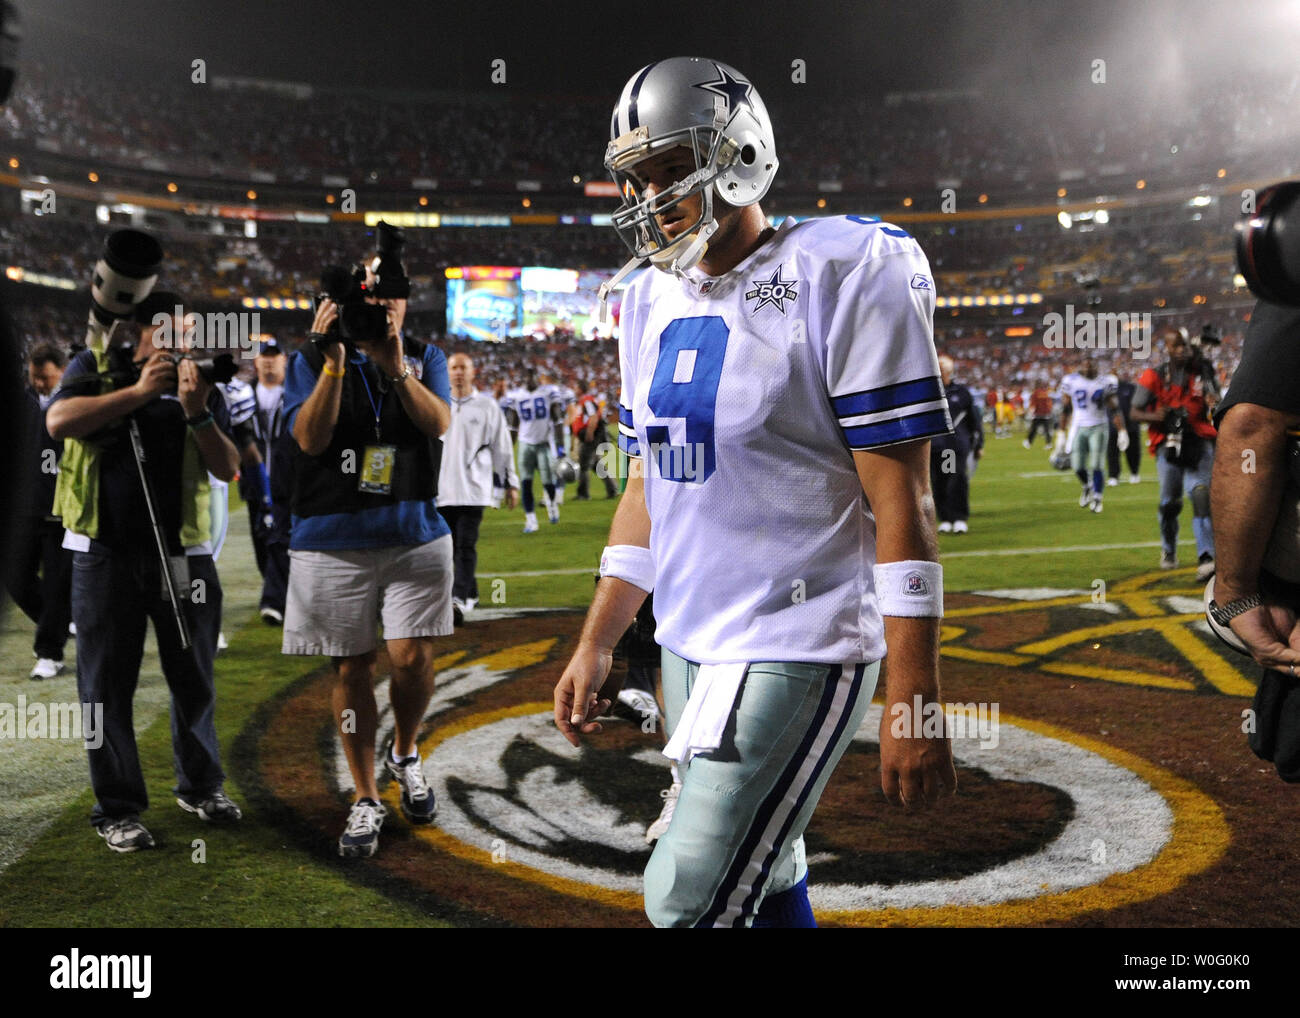 Dallas Cowboys' quarterback Tony Romo leaves the field after the Cowboys were defeated by Washington Redskins 13-7 at FedEx Field in Landover, Maryland on September 12, 2010.  UPI/Kevin Dietsch Stock Photo